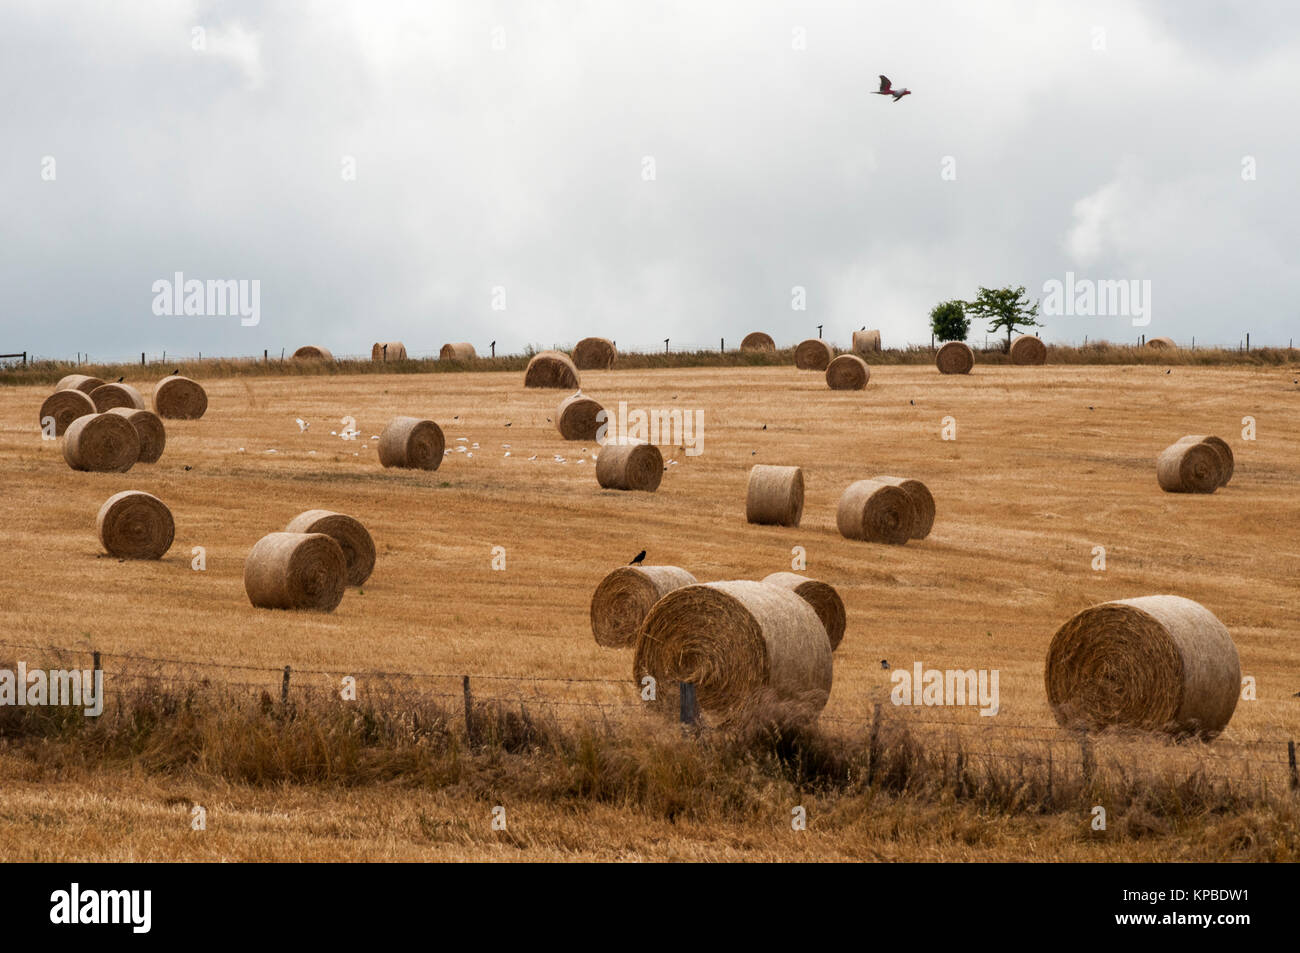 Hay bales lie strewn across a paddock in the Central Highlands region of Victoria, Australia Stock Photo